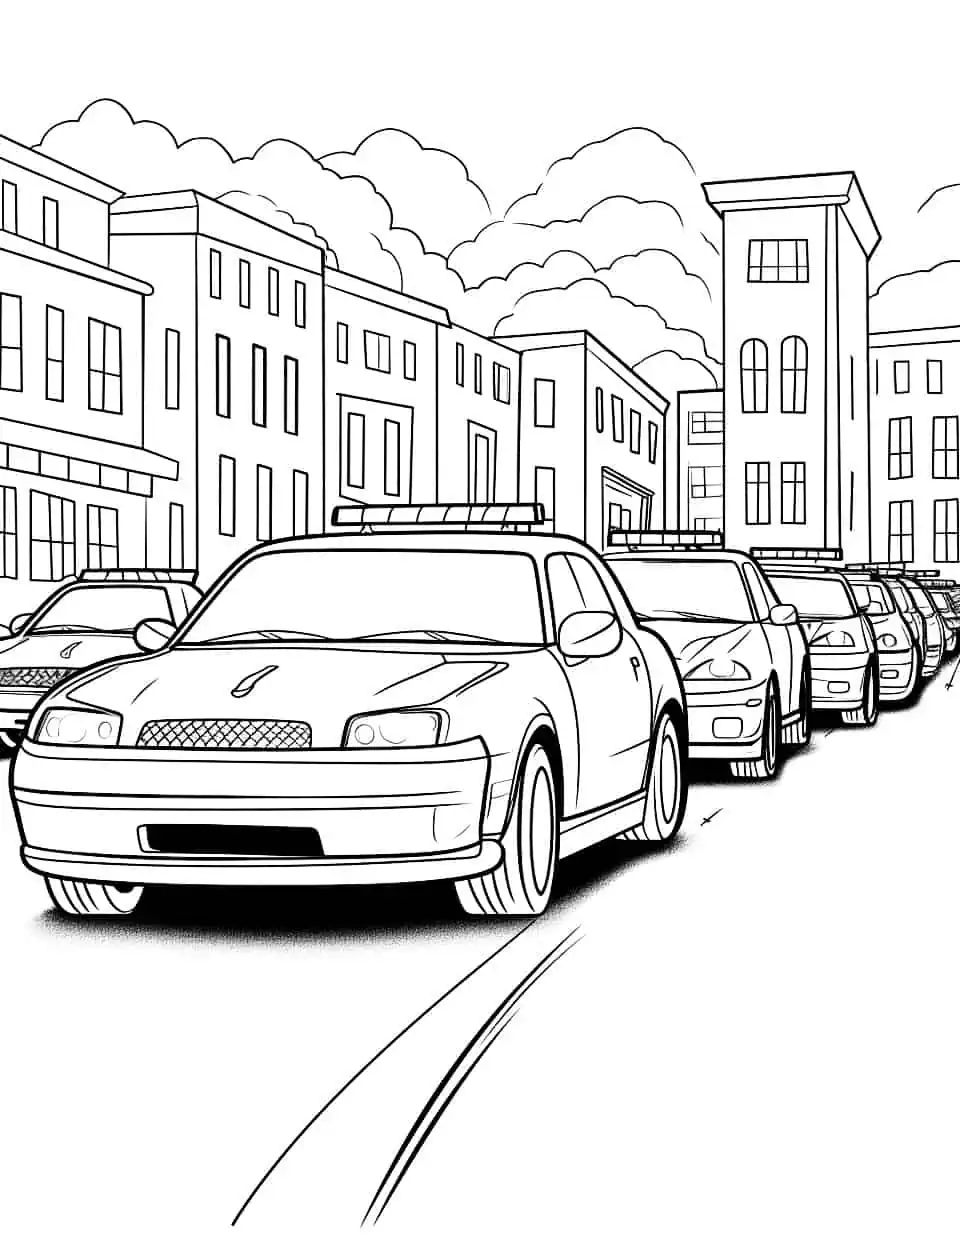 Car coloring pages free printable sheets